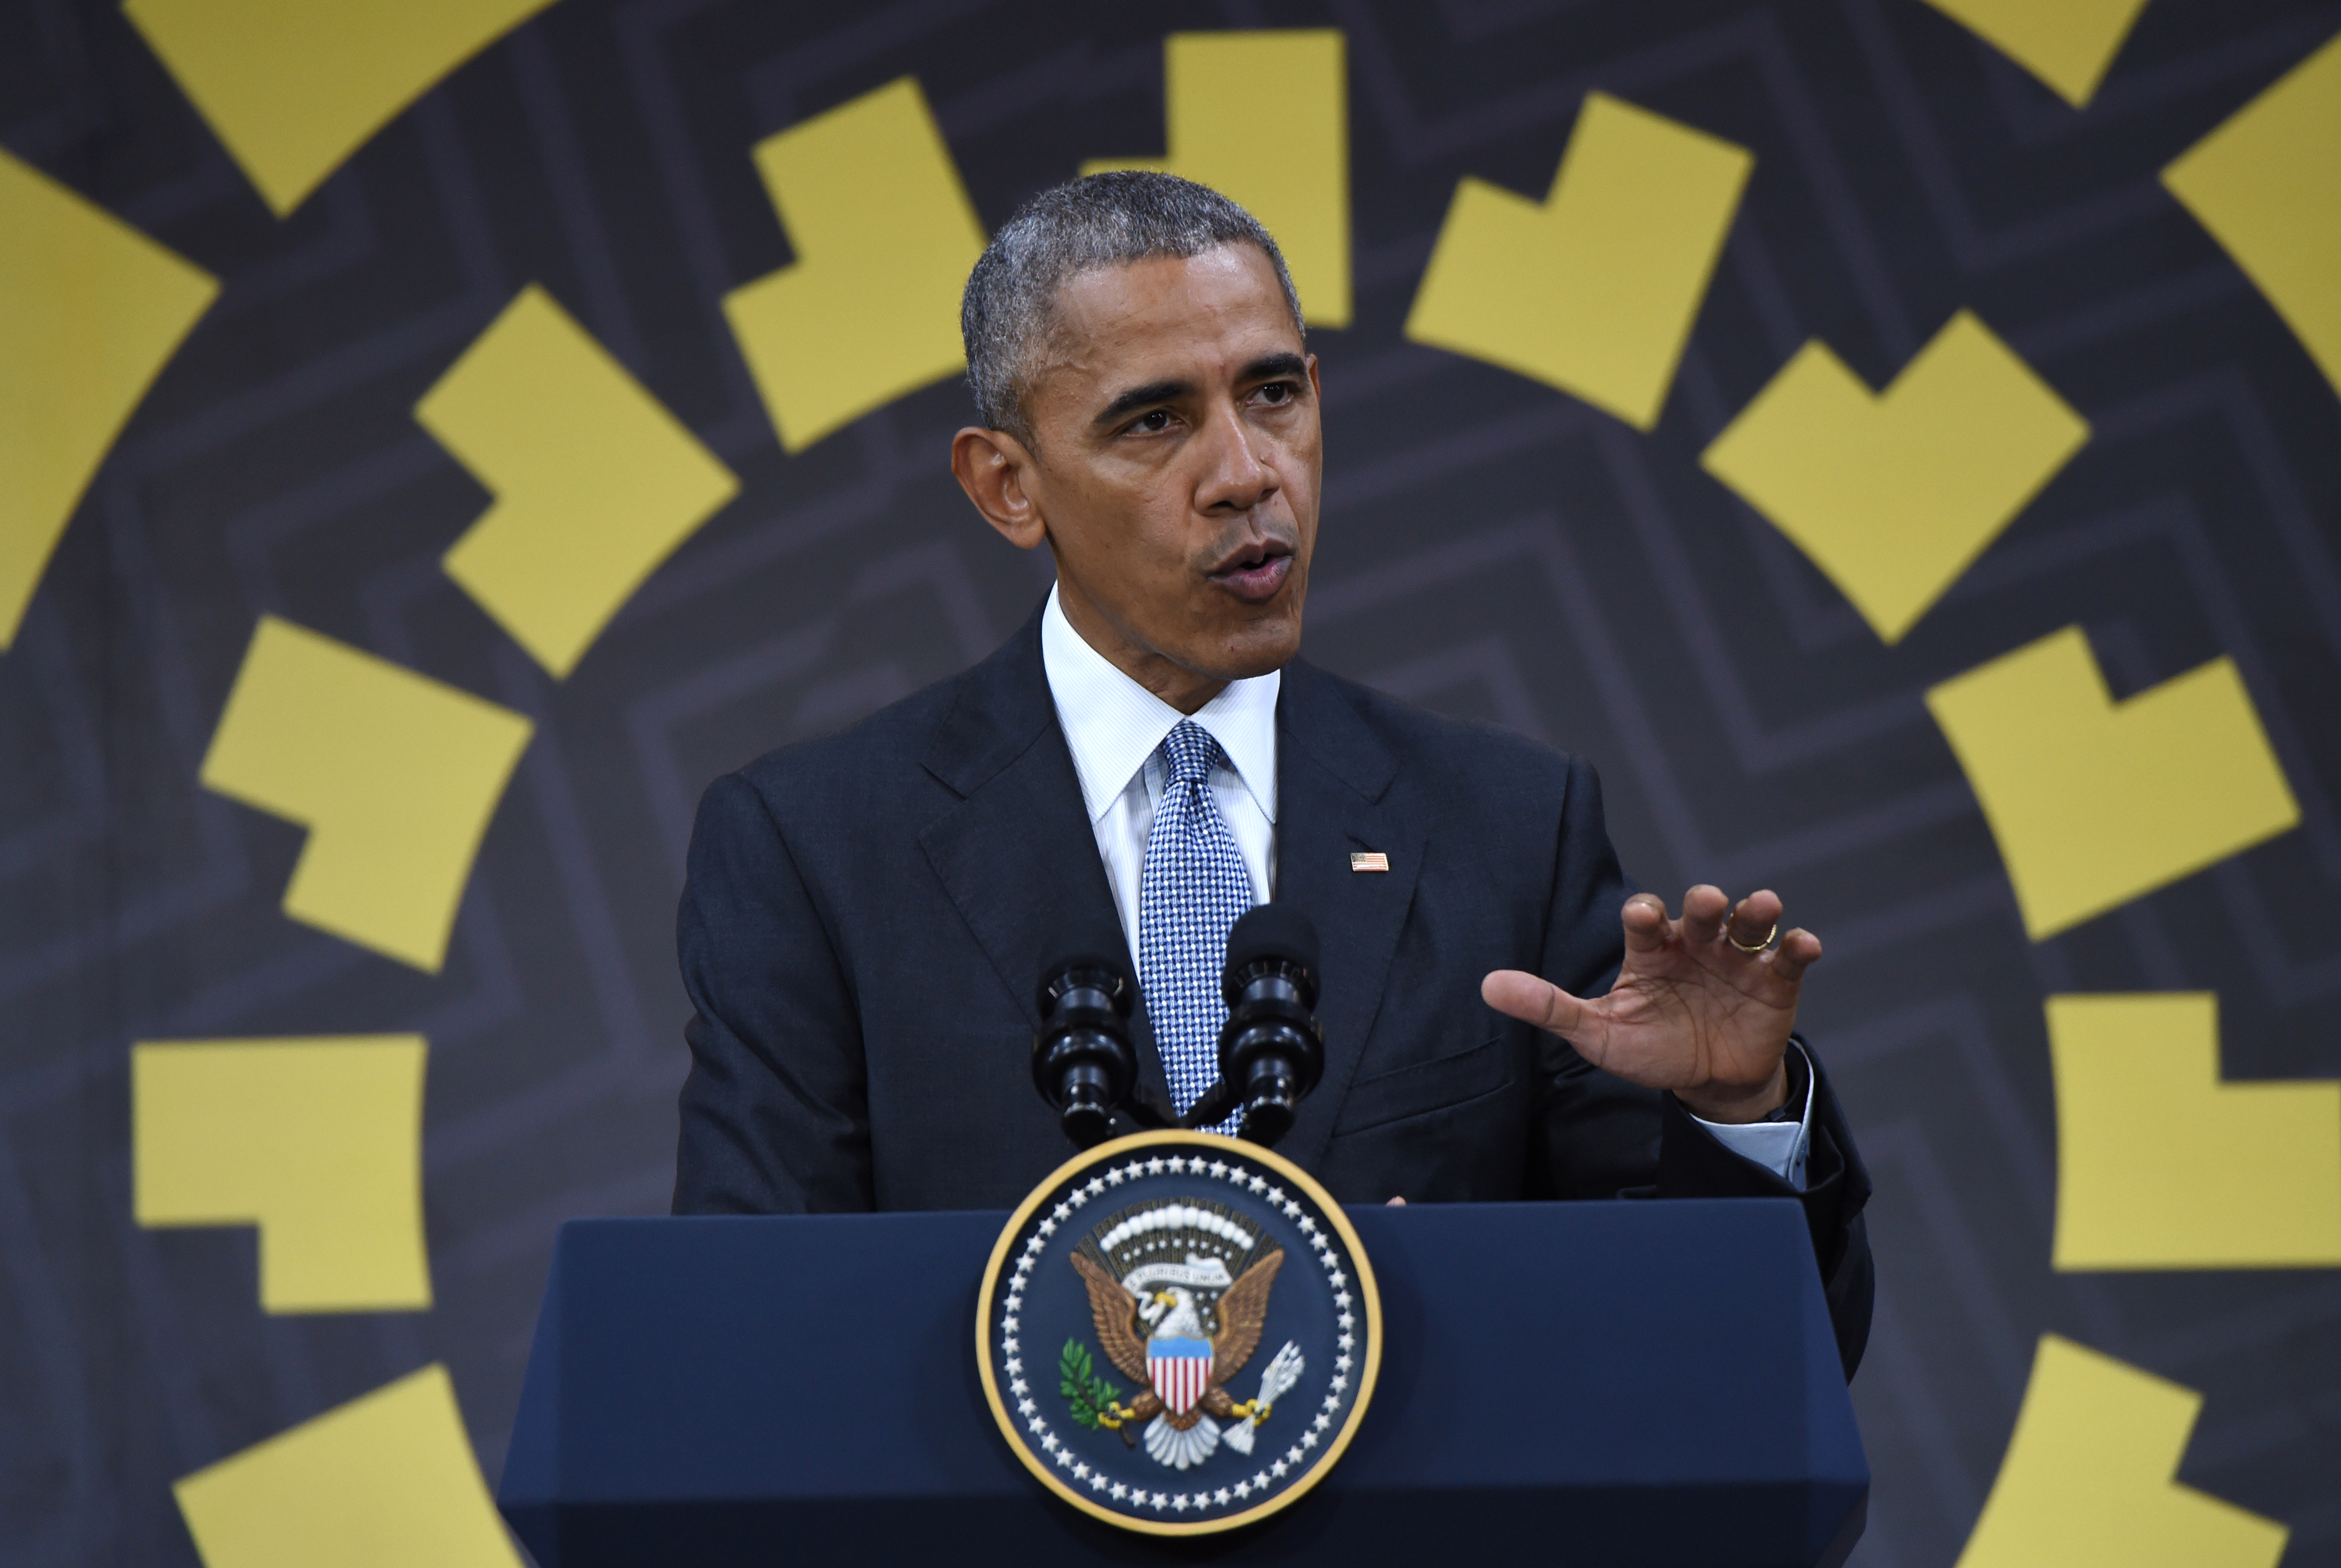 US President Barack Obama speaks at a press conference on the last day of the Asia-Pacific Economic Cooperation (APEC) Summit in Lima on November 20, 2016. Asia-Pacific leaders vowed on November 20 to fight protectionism at the close of a summit upended by US President-elect Donald Trump's shock victory and virulent attacks on free-trade deals. / AFP PHOTO / Martin BERNETTI